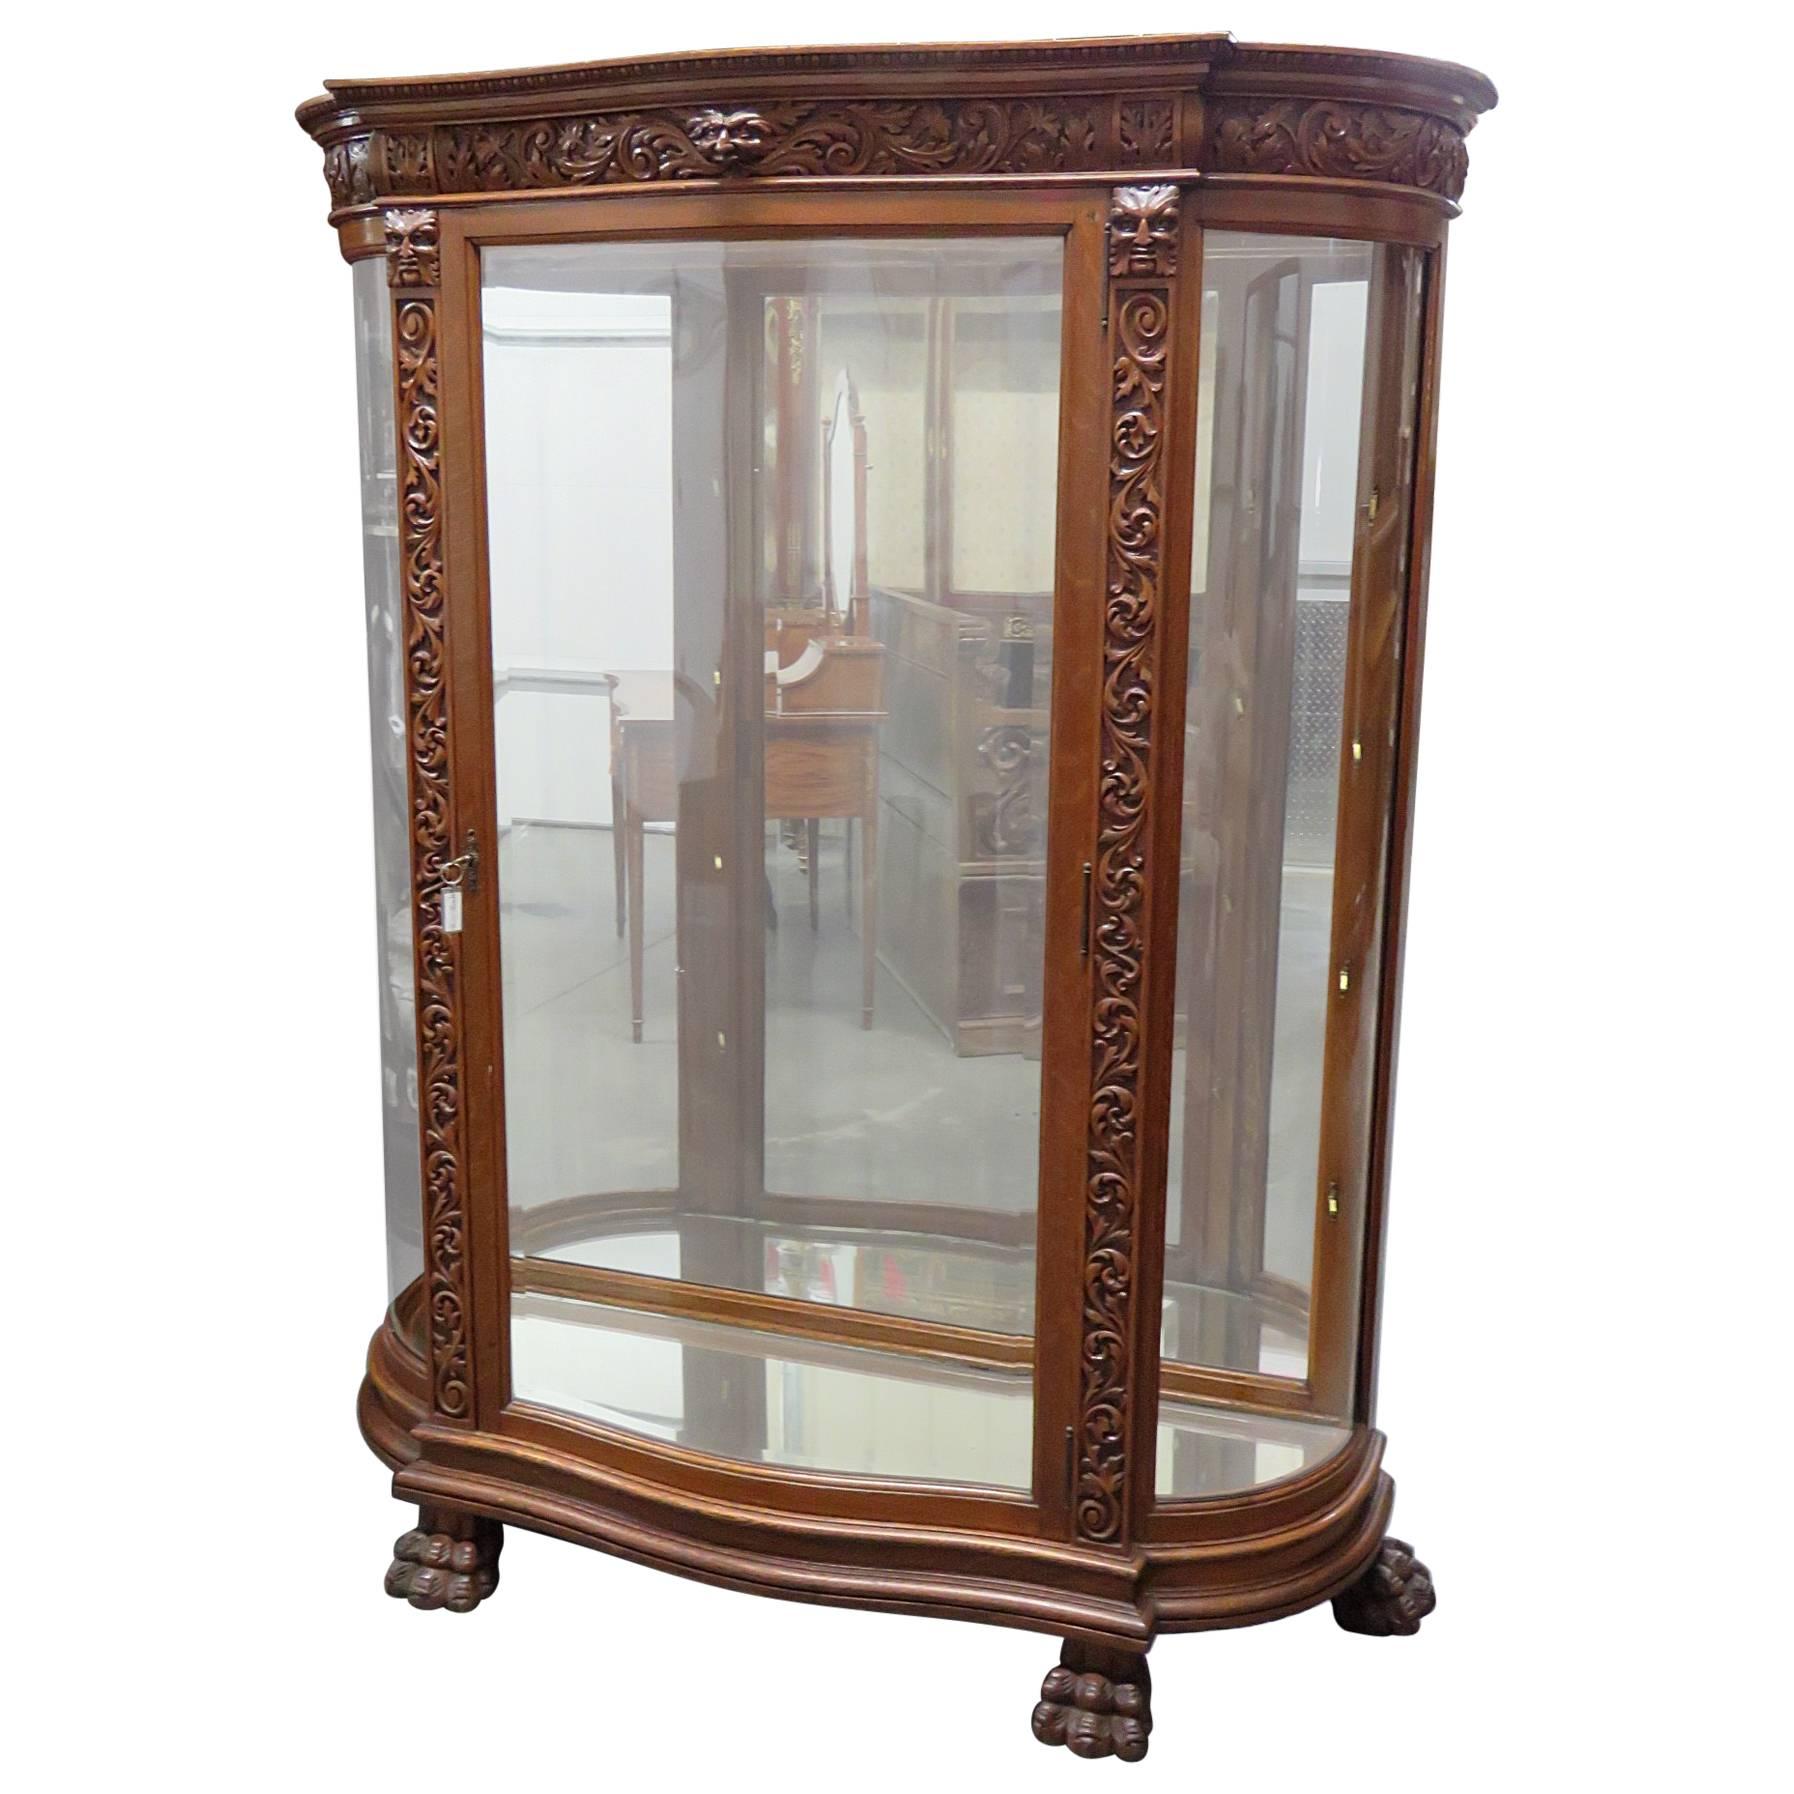 Horner Style China/Display Cabinet